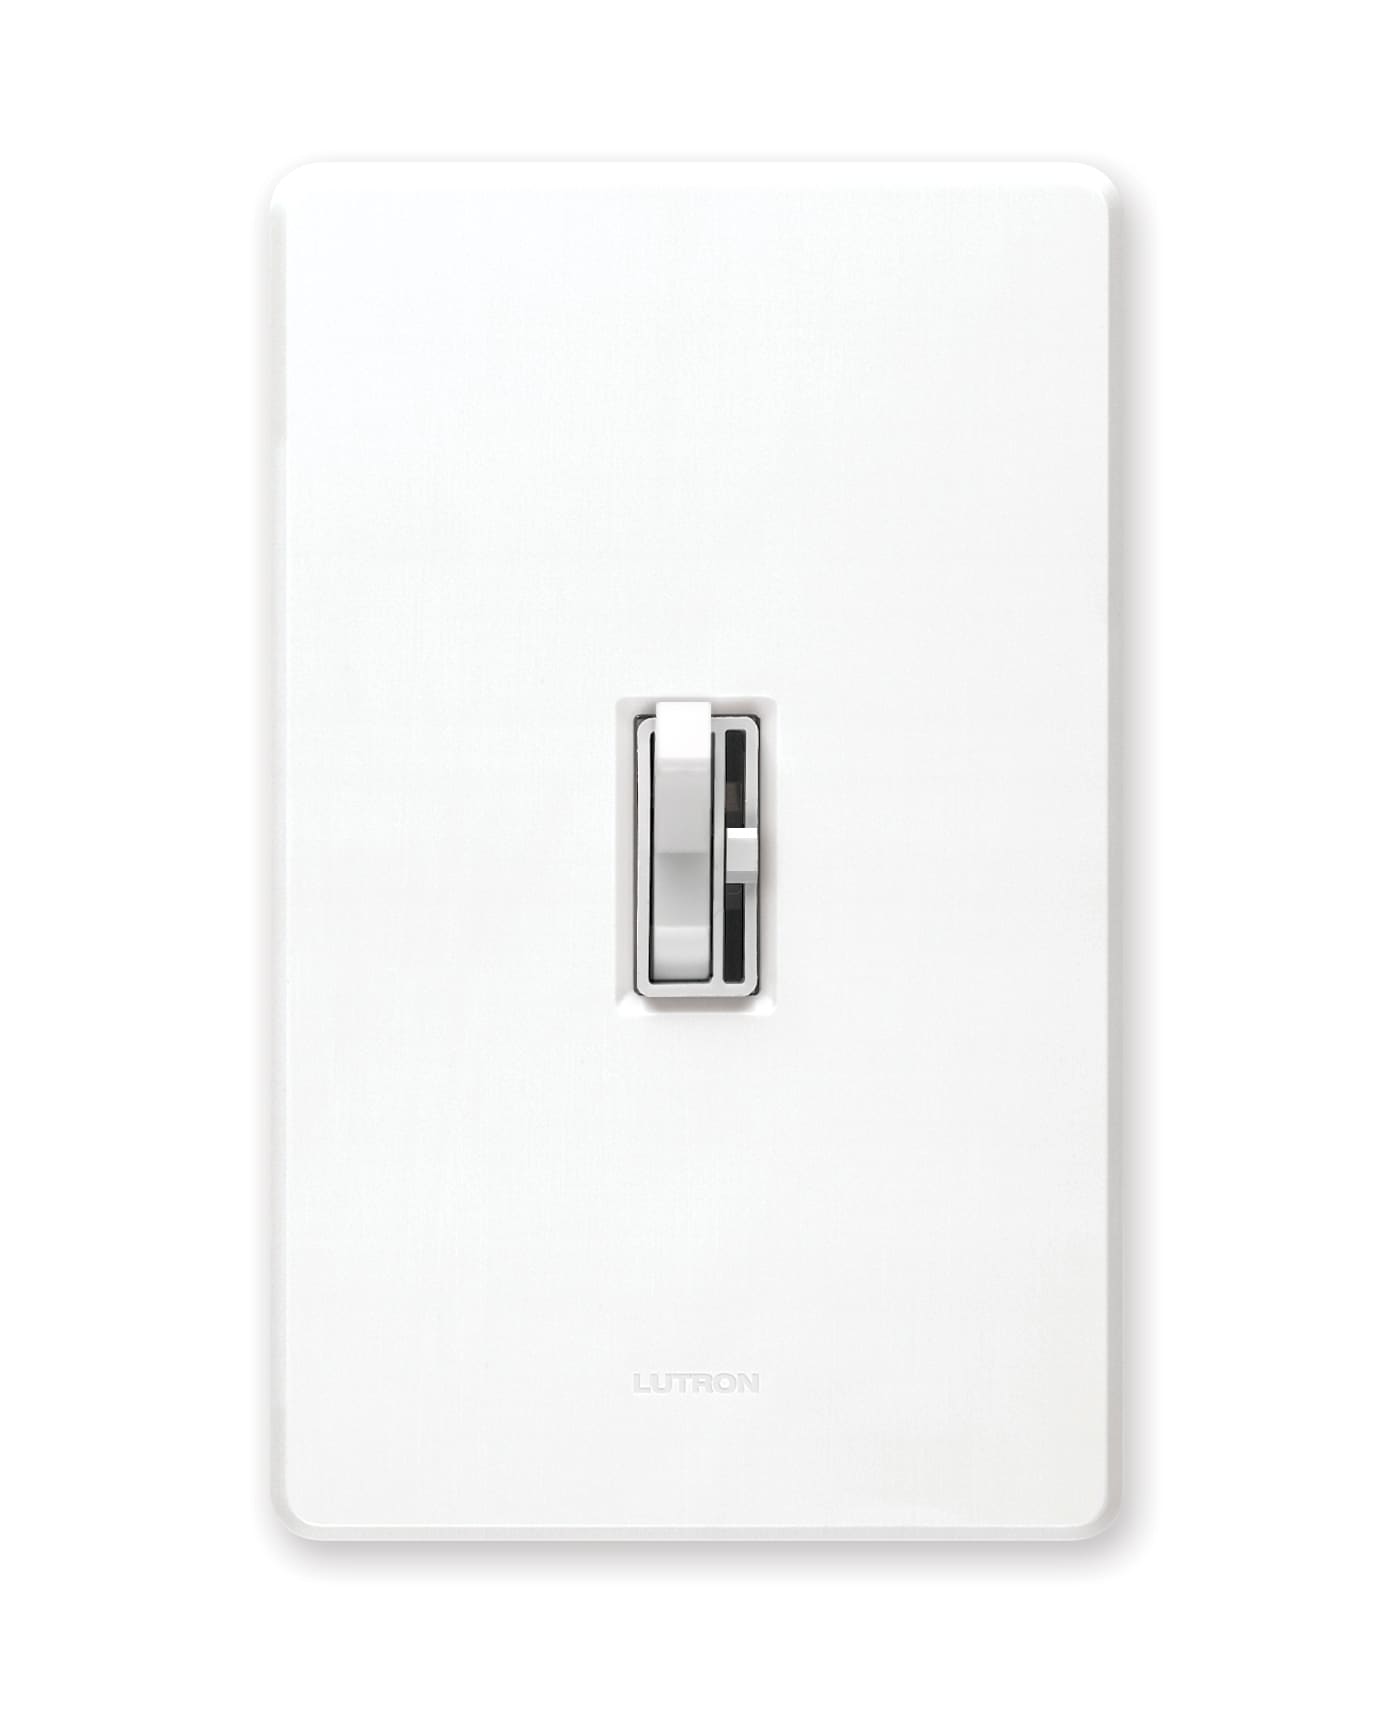 Lutron Toggler TG-10P-WH Single Pole Preset Dimmer Light Switch 1000w WHITE 